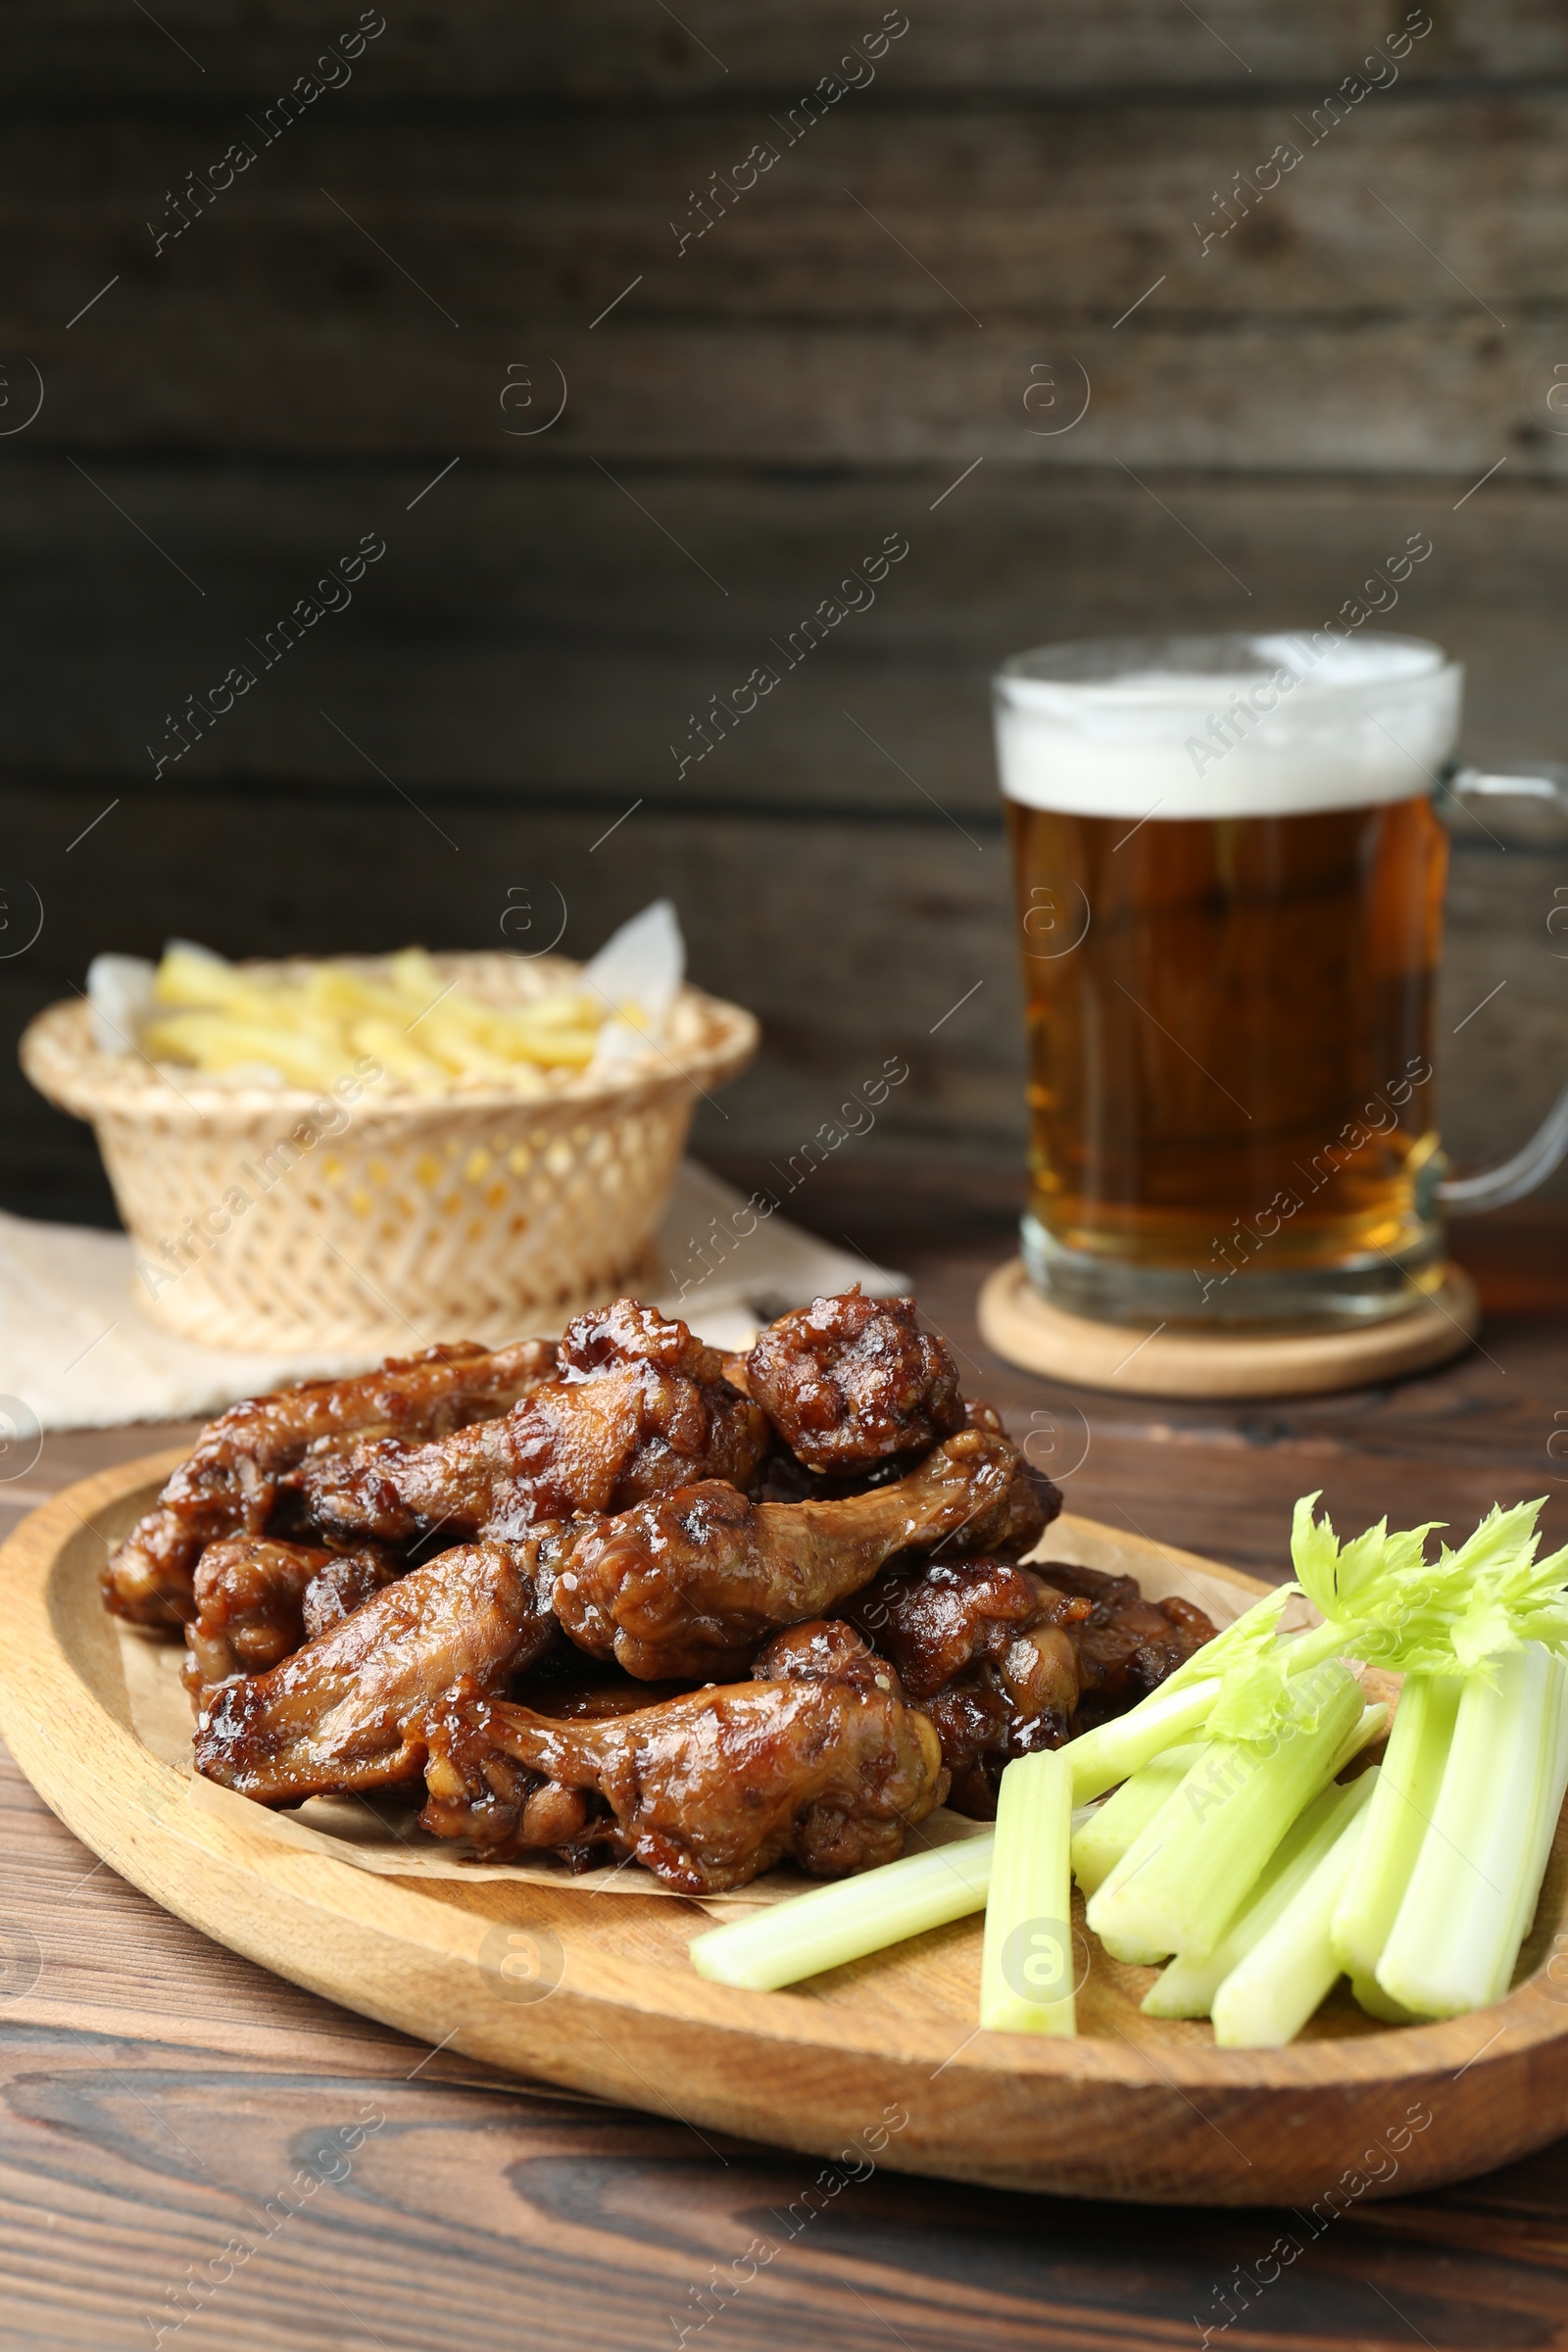 Photo of Delicious chicken wings, celery, beer and french fries on wooden table